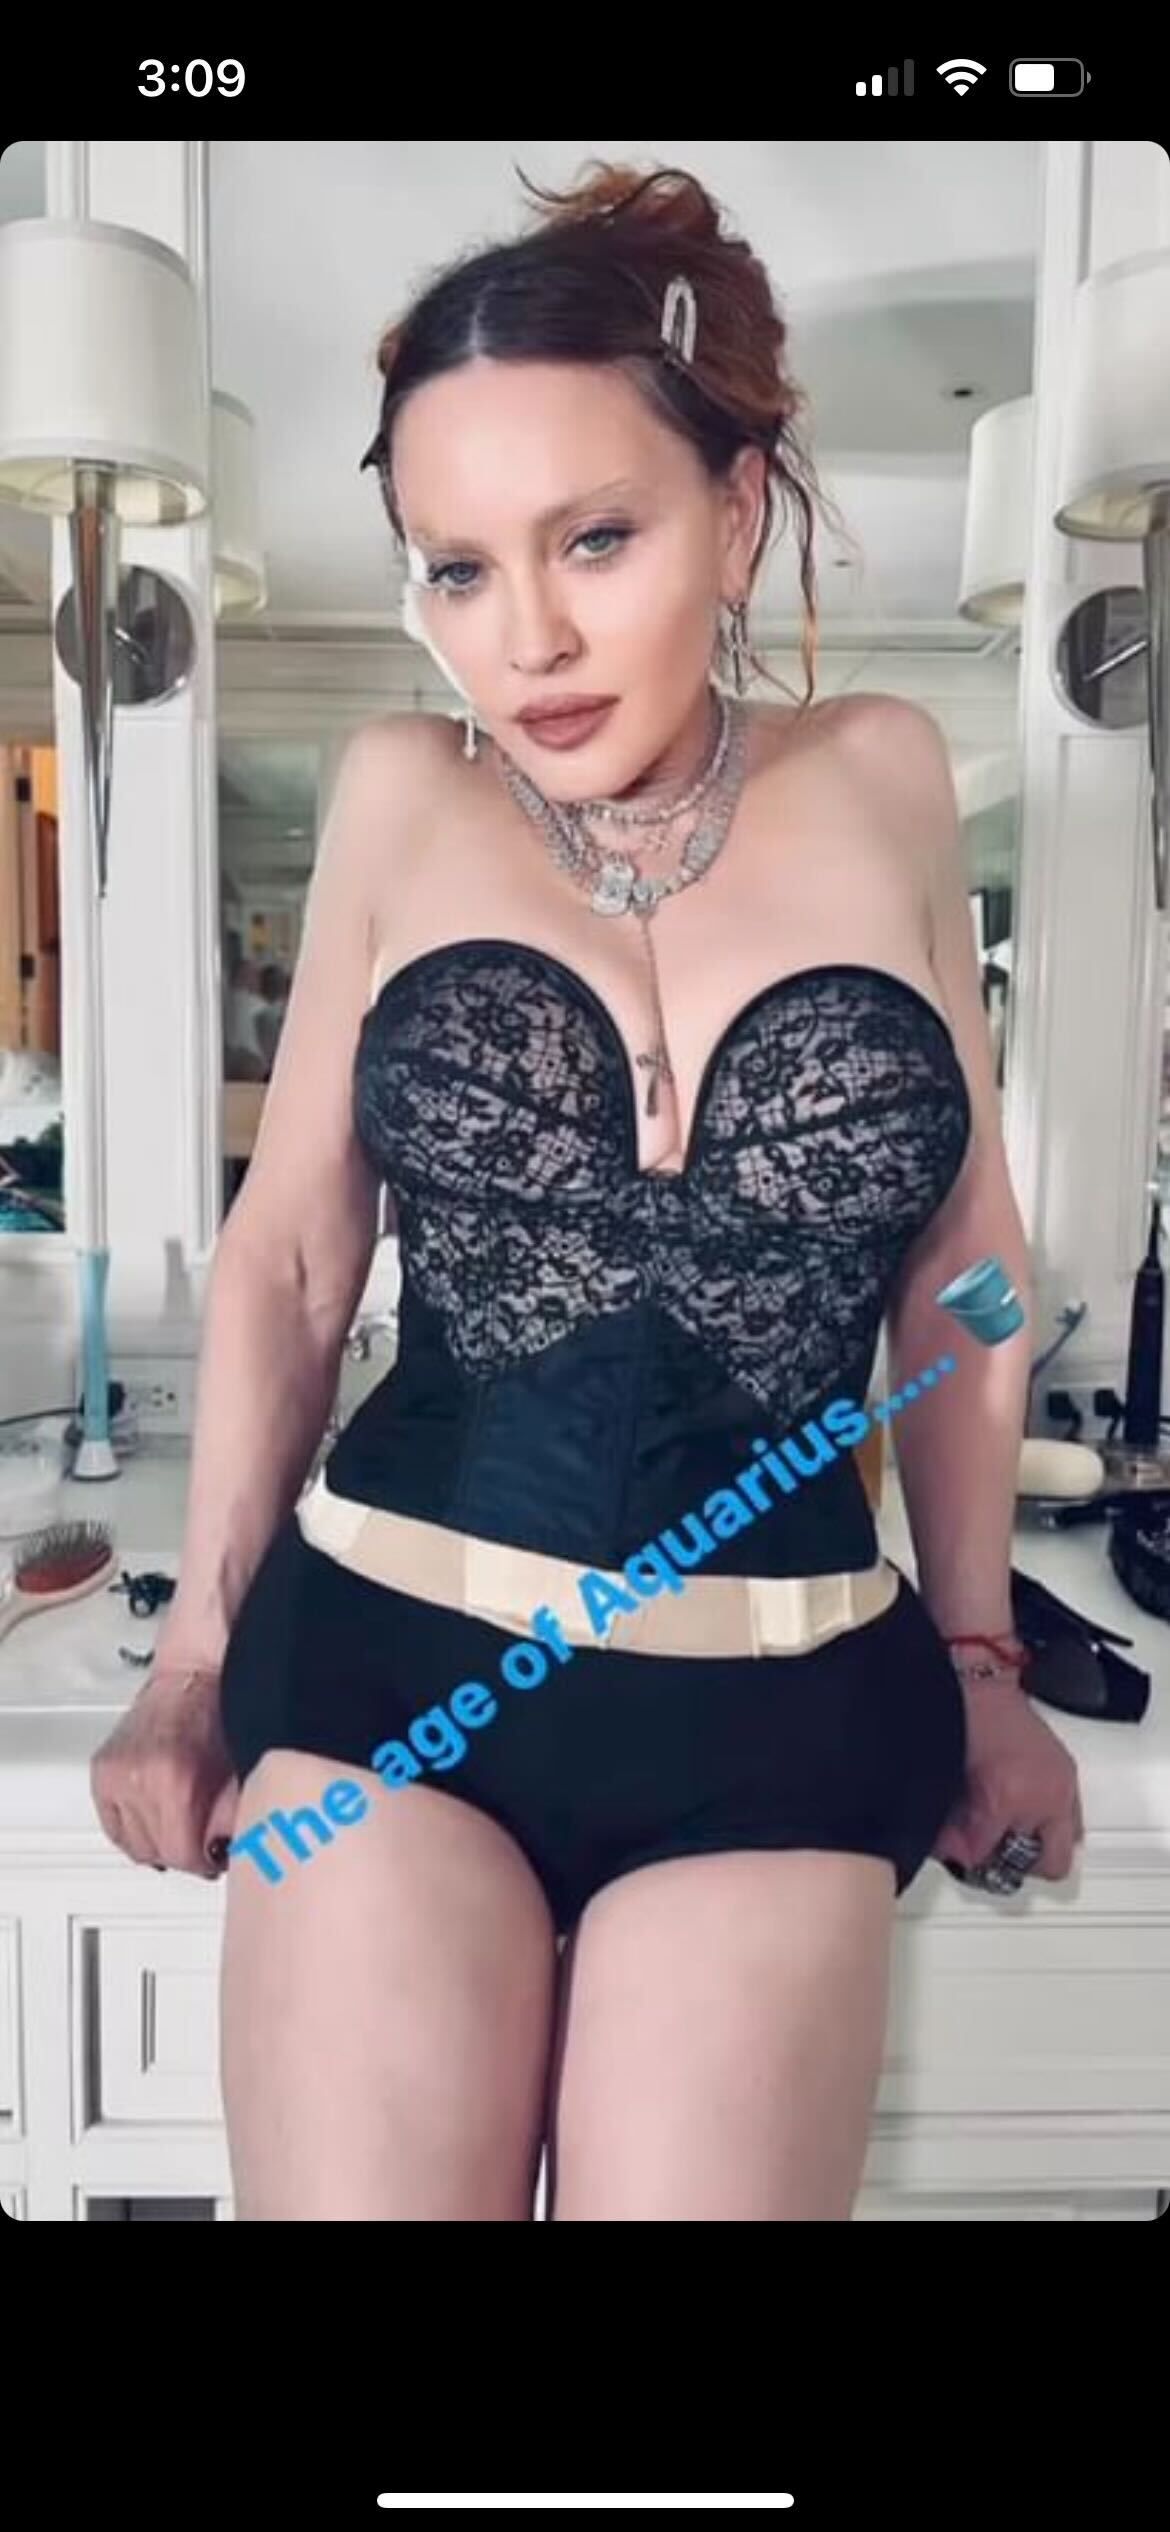 Madonna Has Epic Legs In Fishnets And Lingerie In An IG Photo